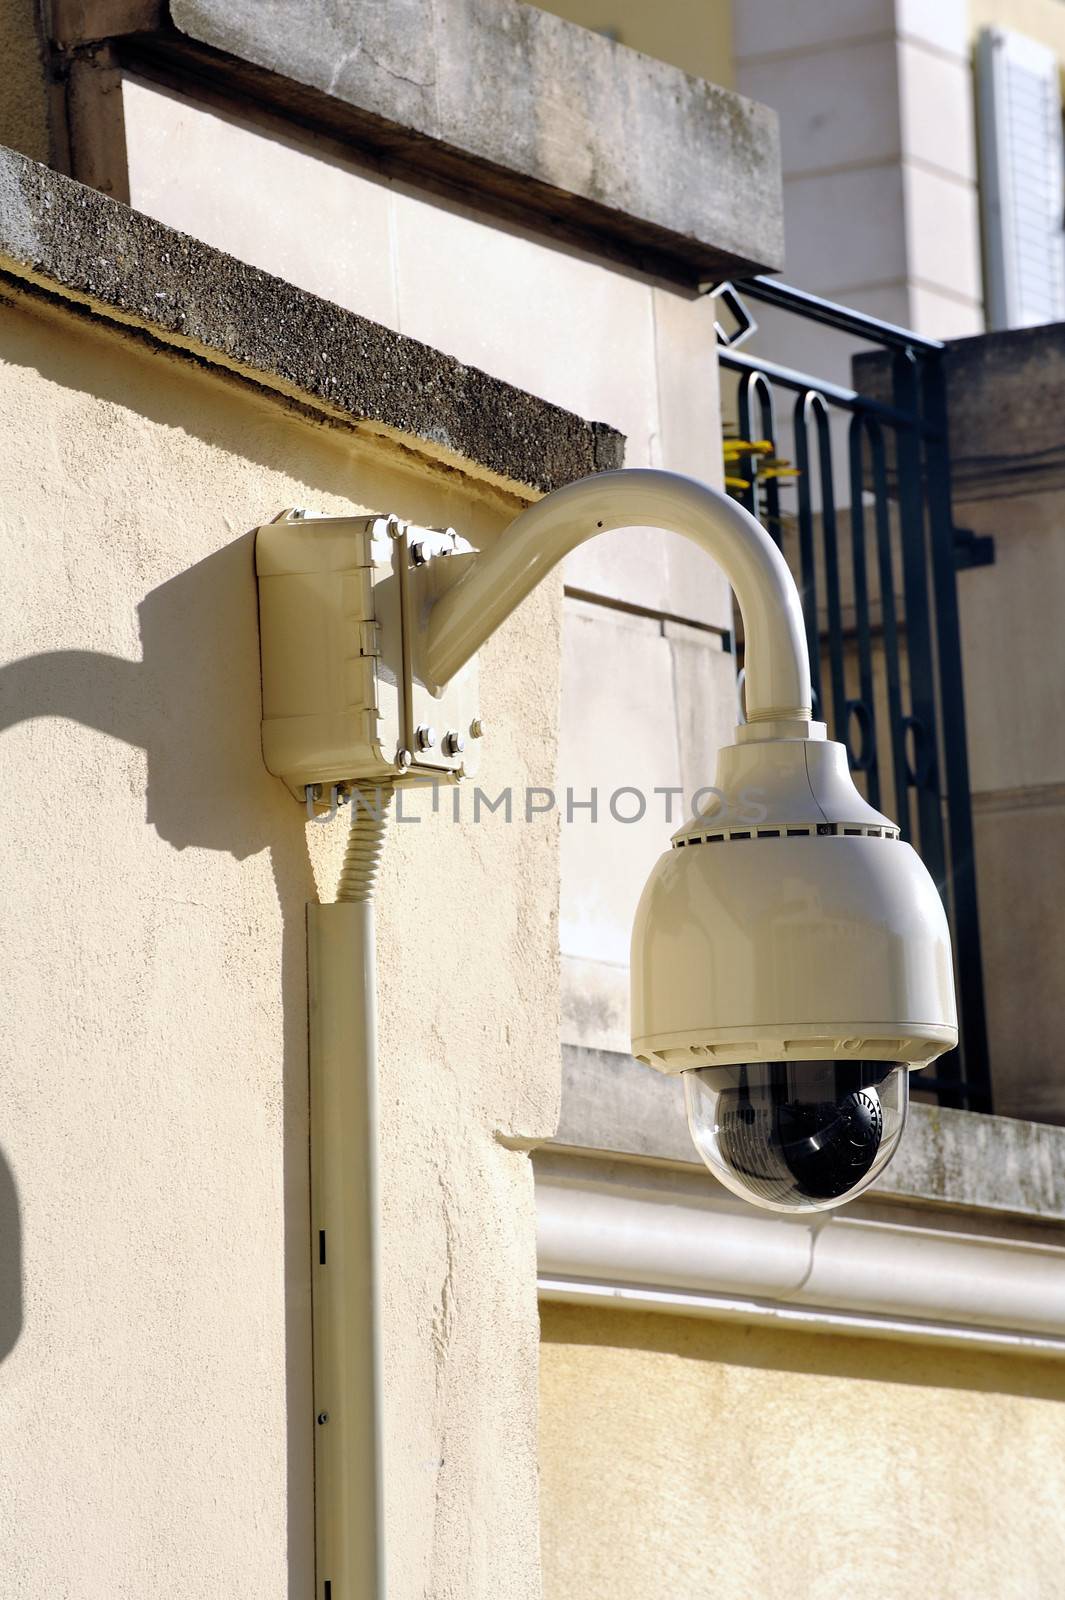 CCTV camera by gillespaire